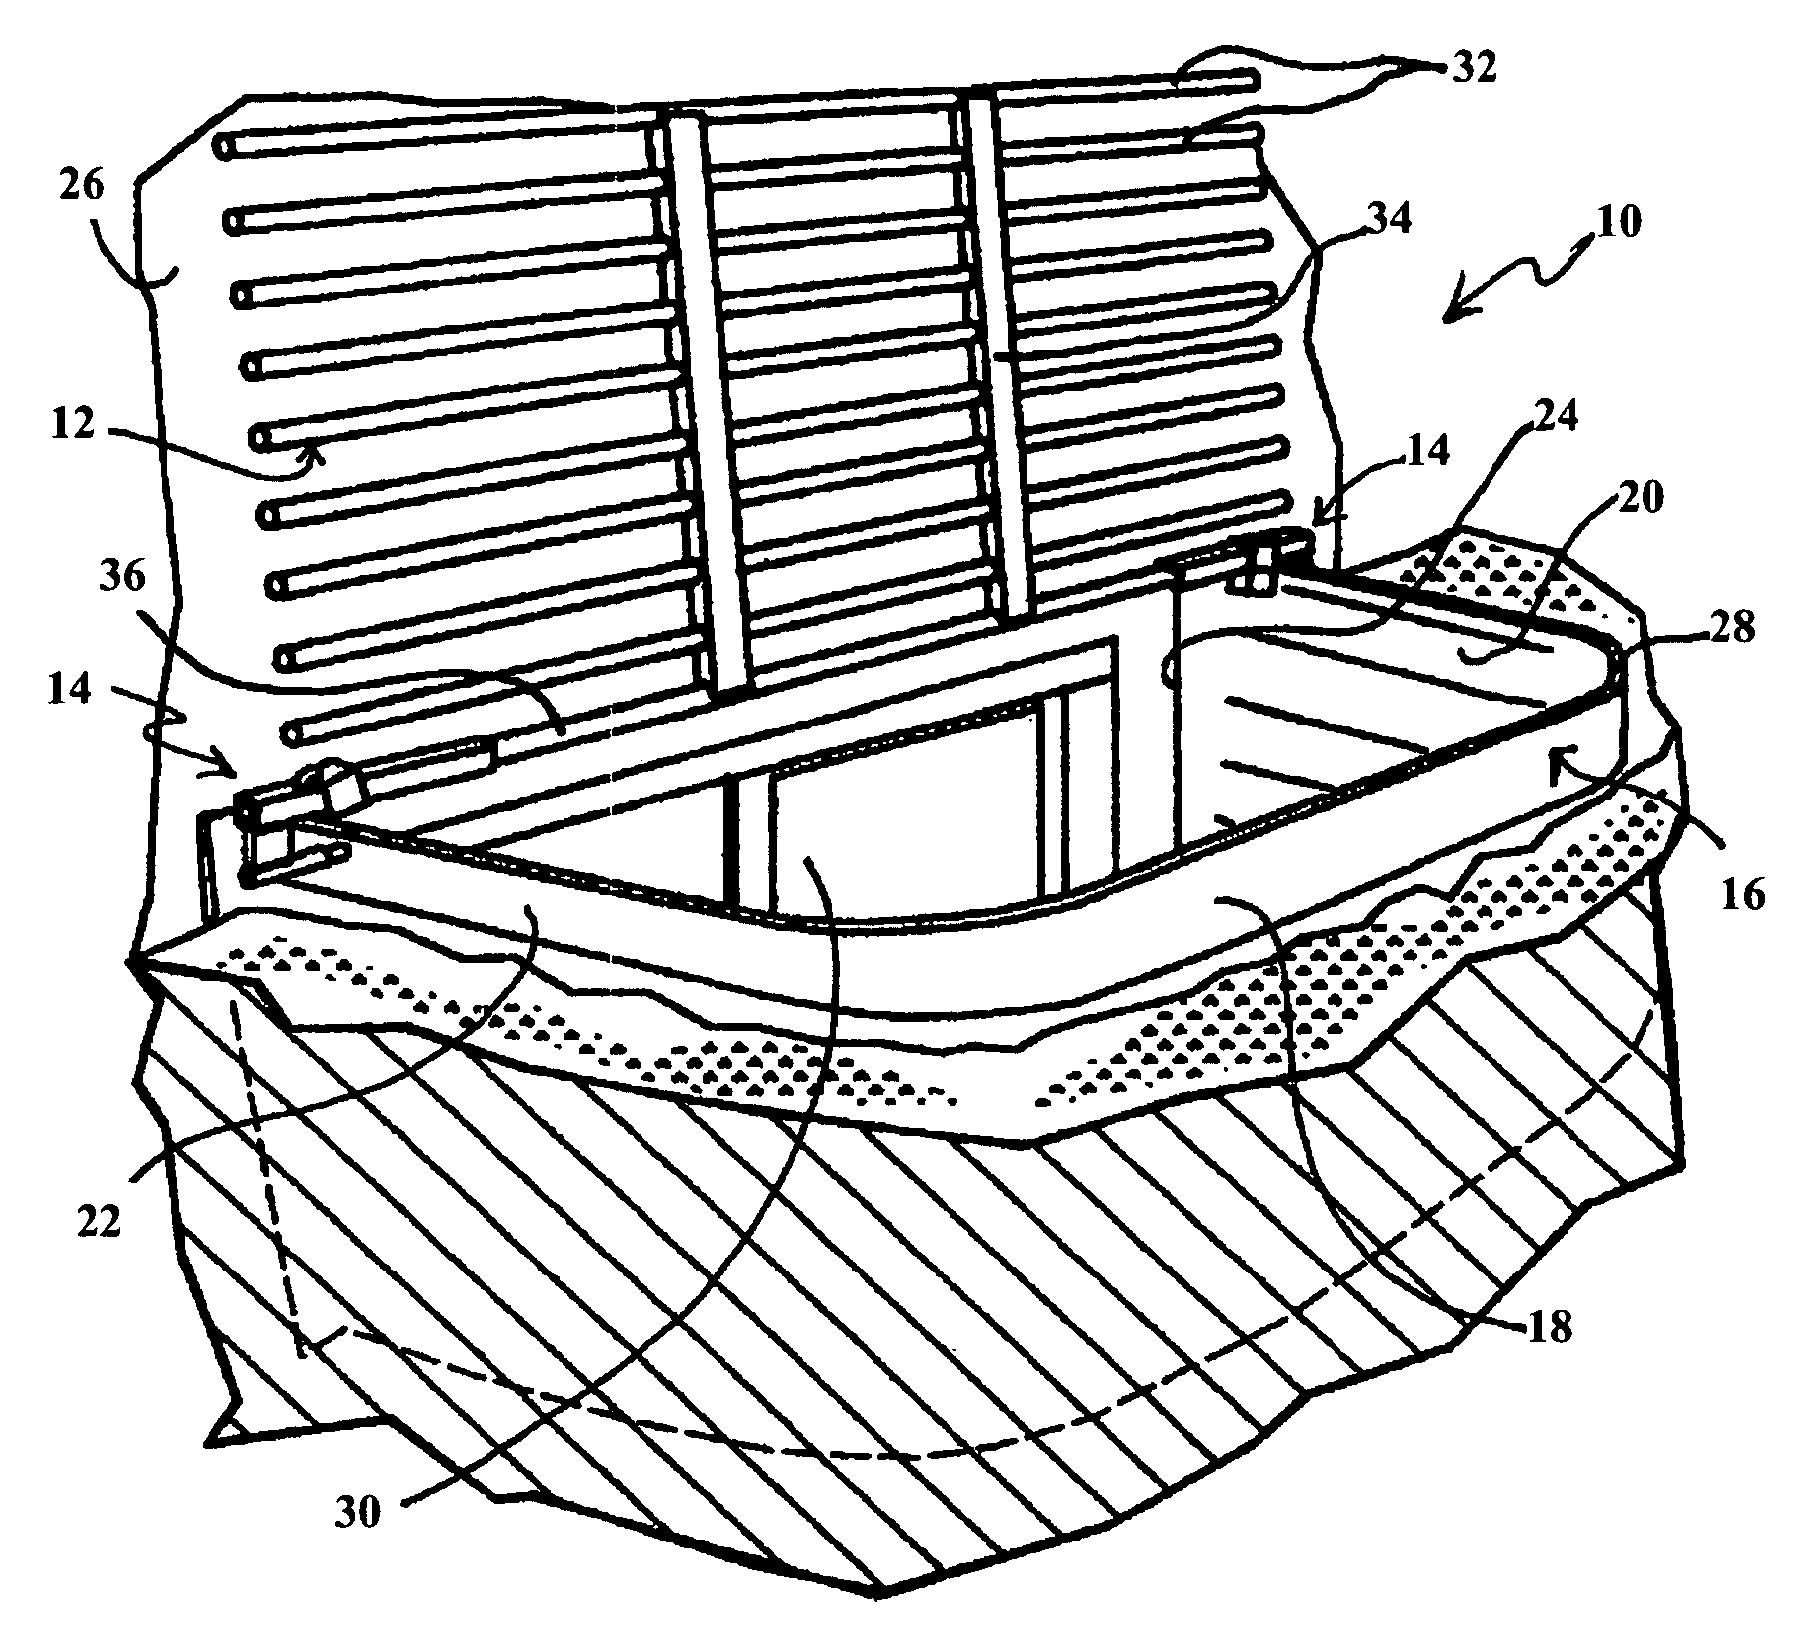 Window well covering system